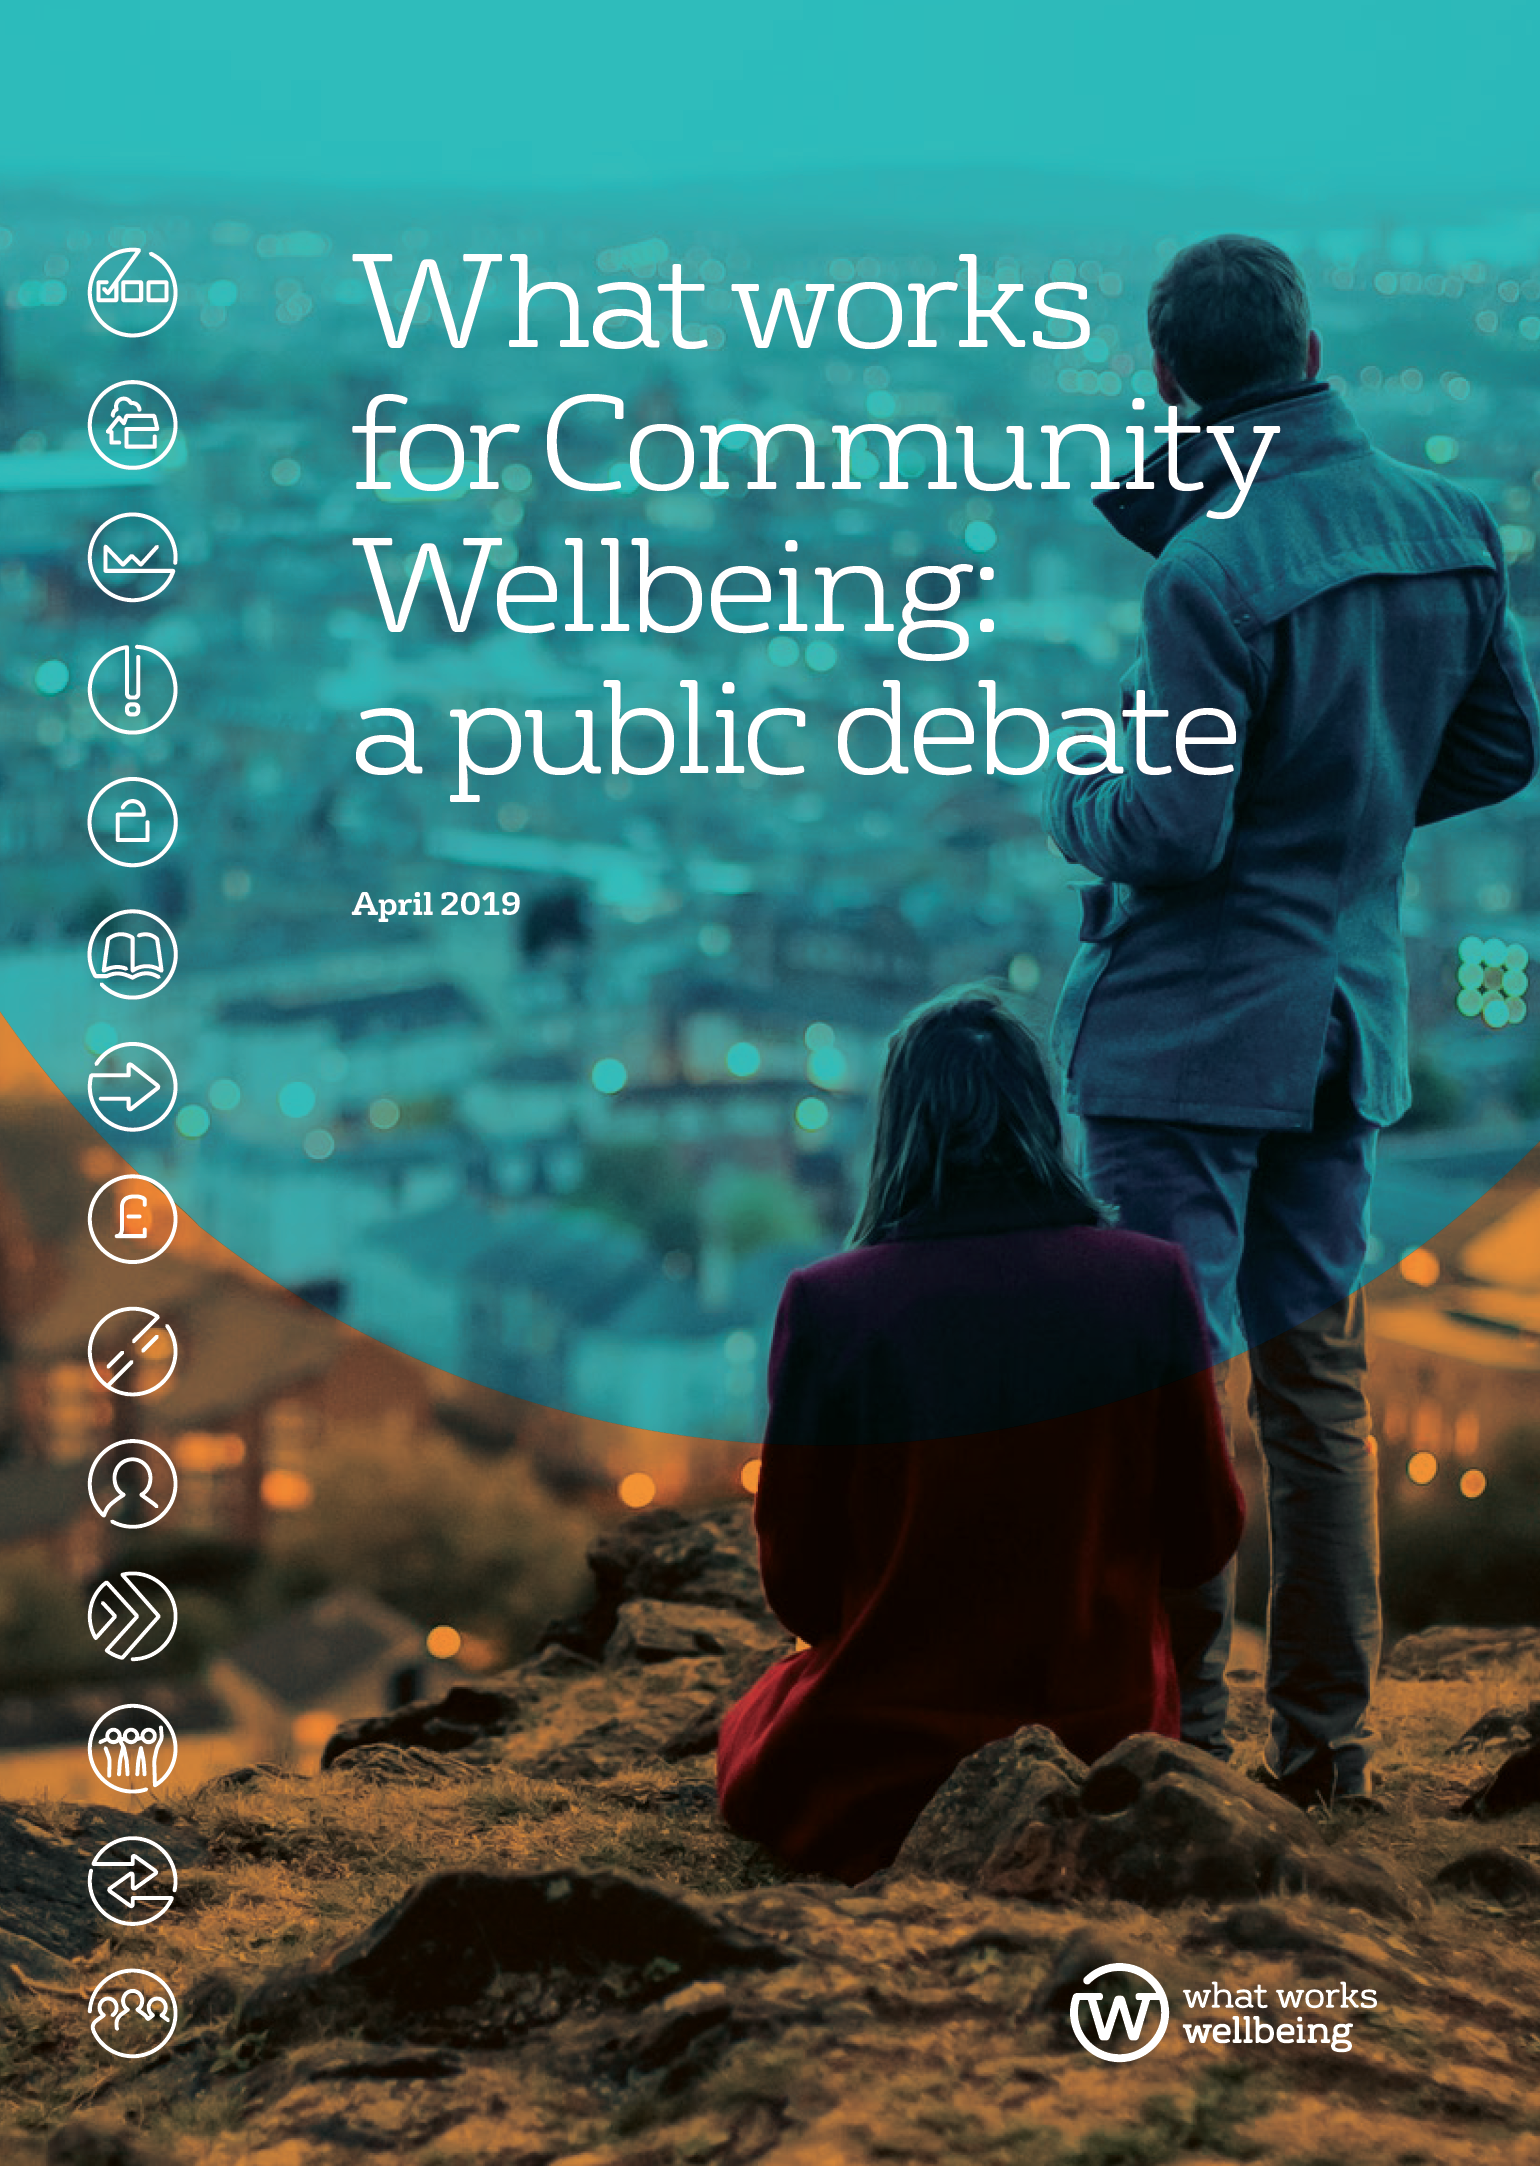 What works for community wellbeing: a public debate